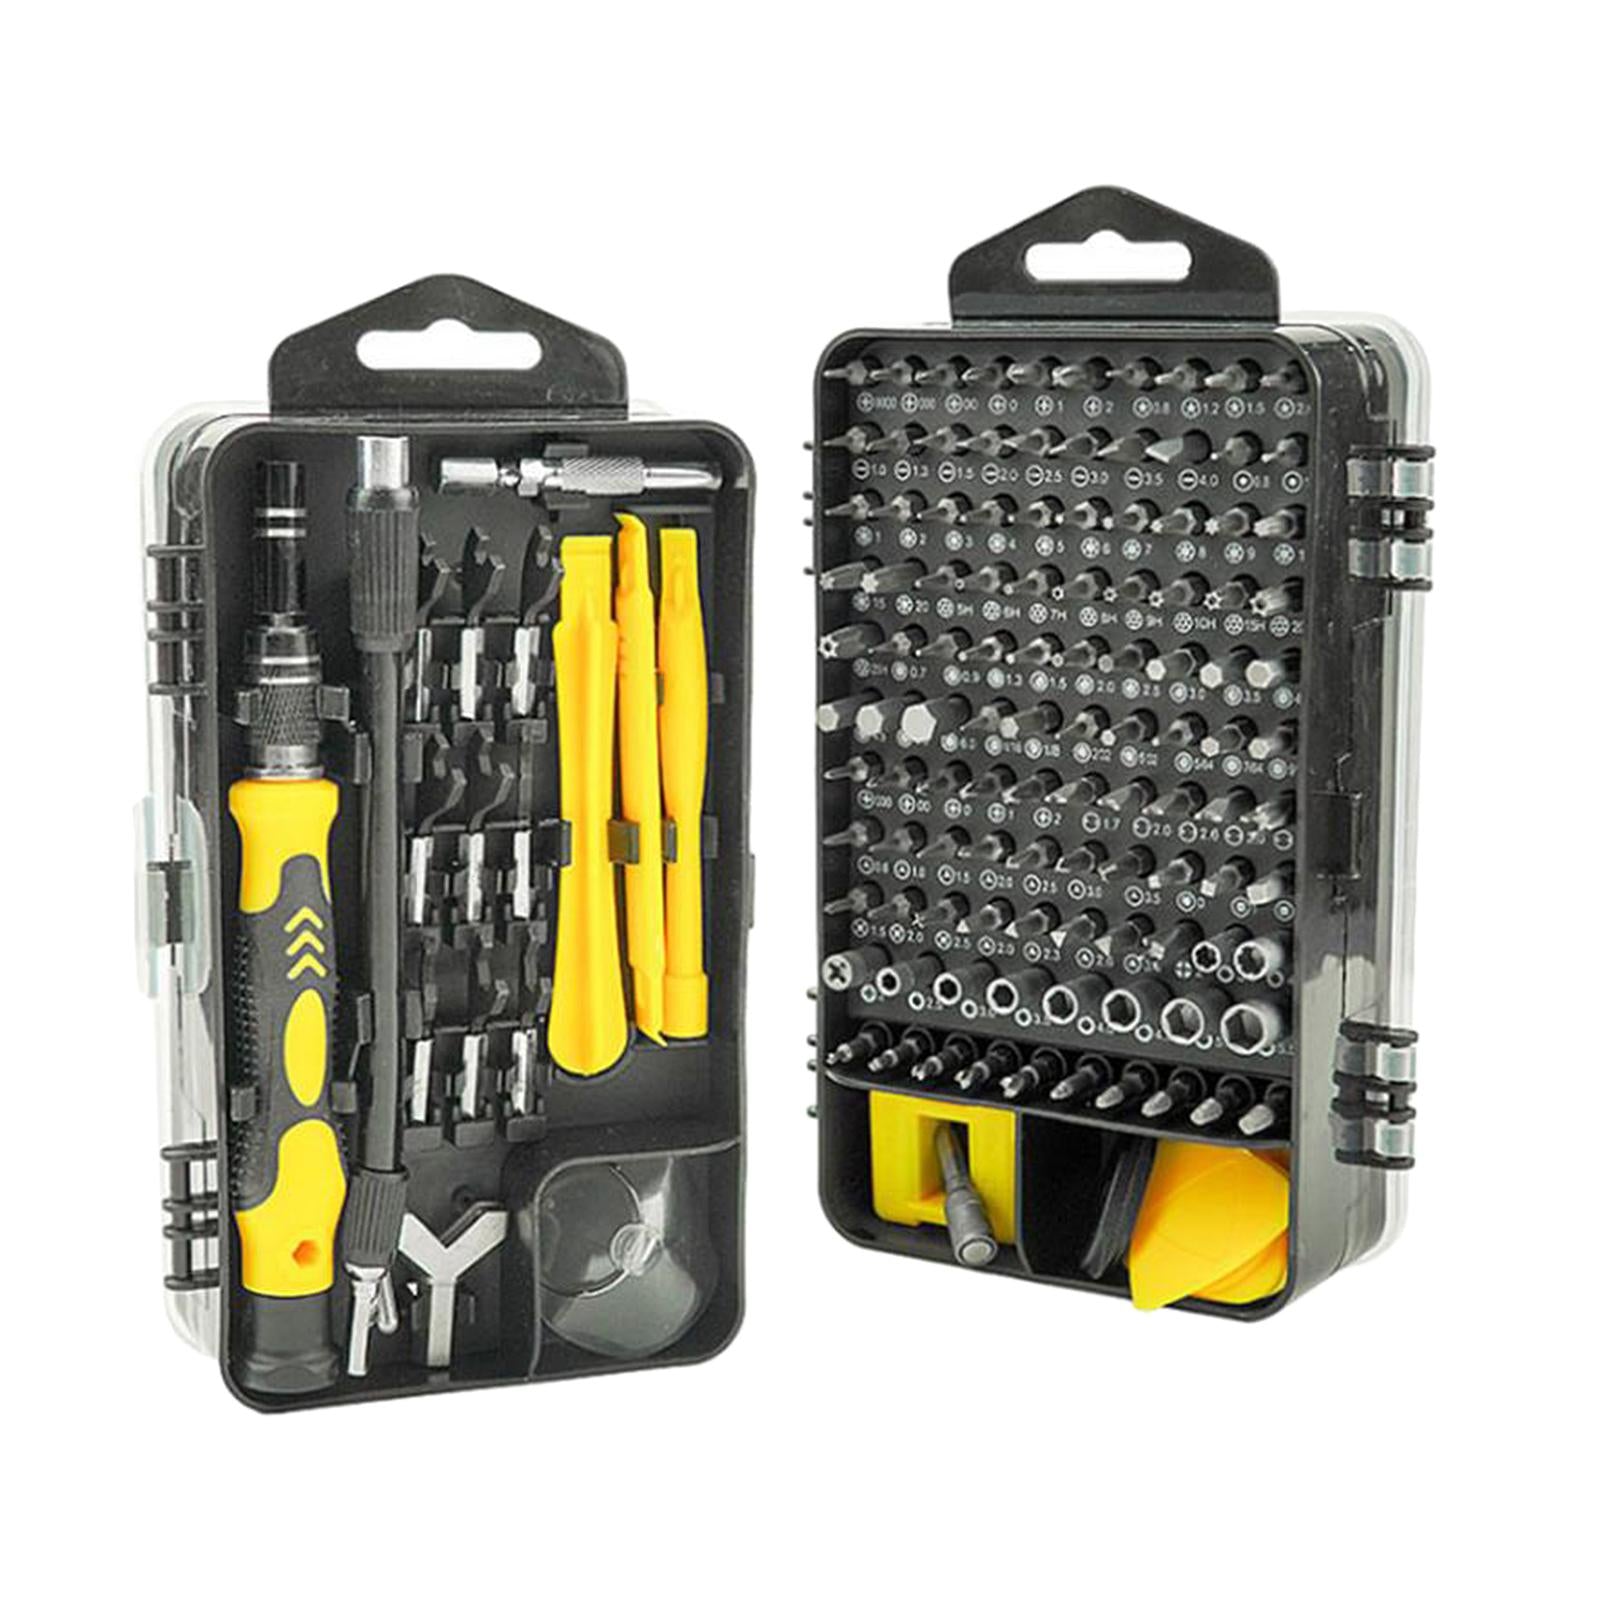 138 in 1 Screwdriver Kit Repair Tool Kits with Case for Cellphone DIY Laptop Yellow